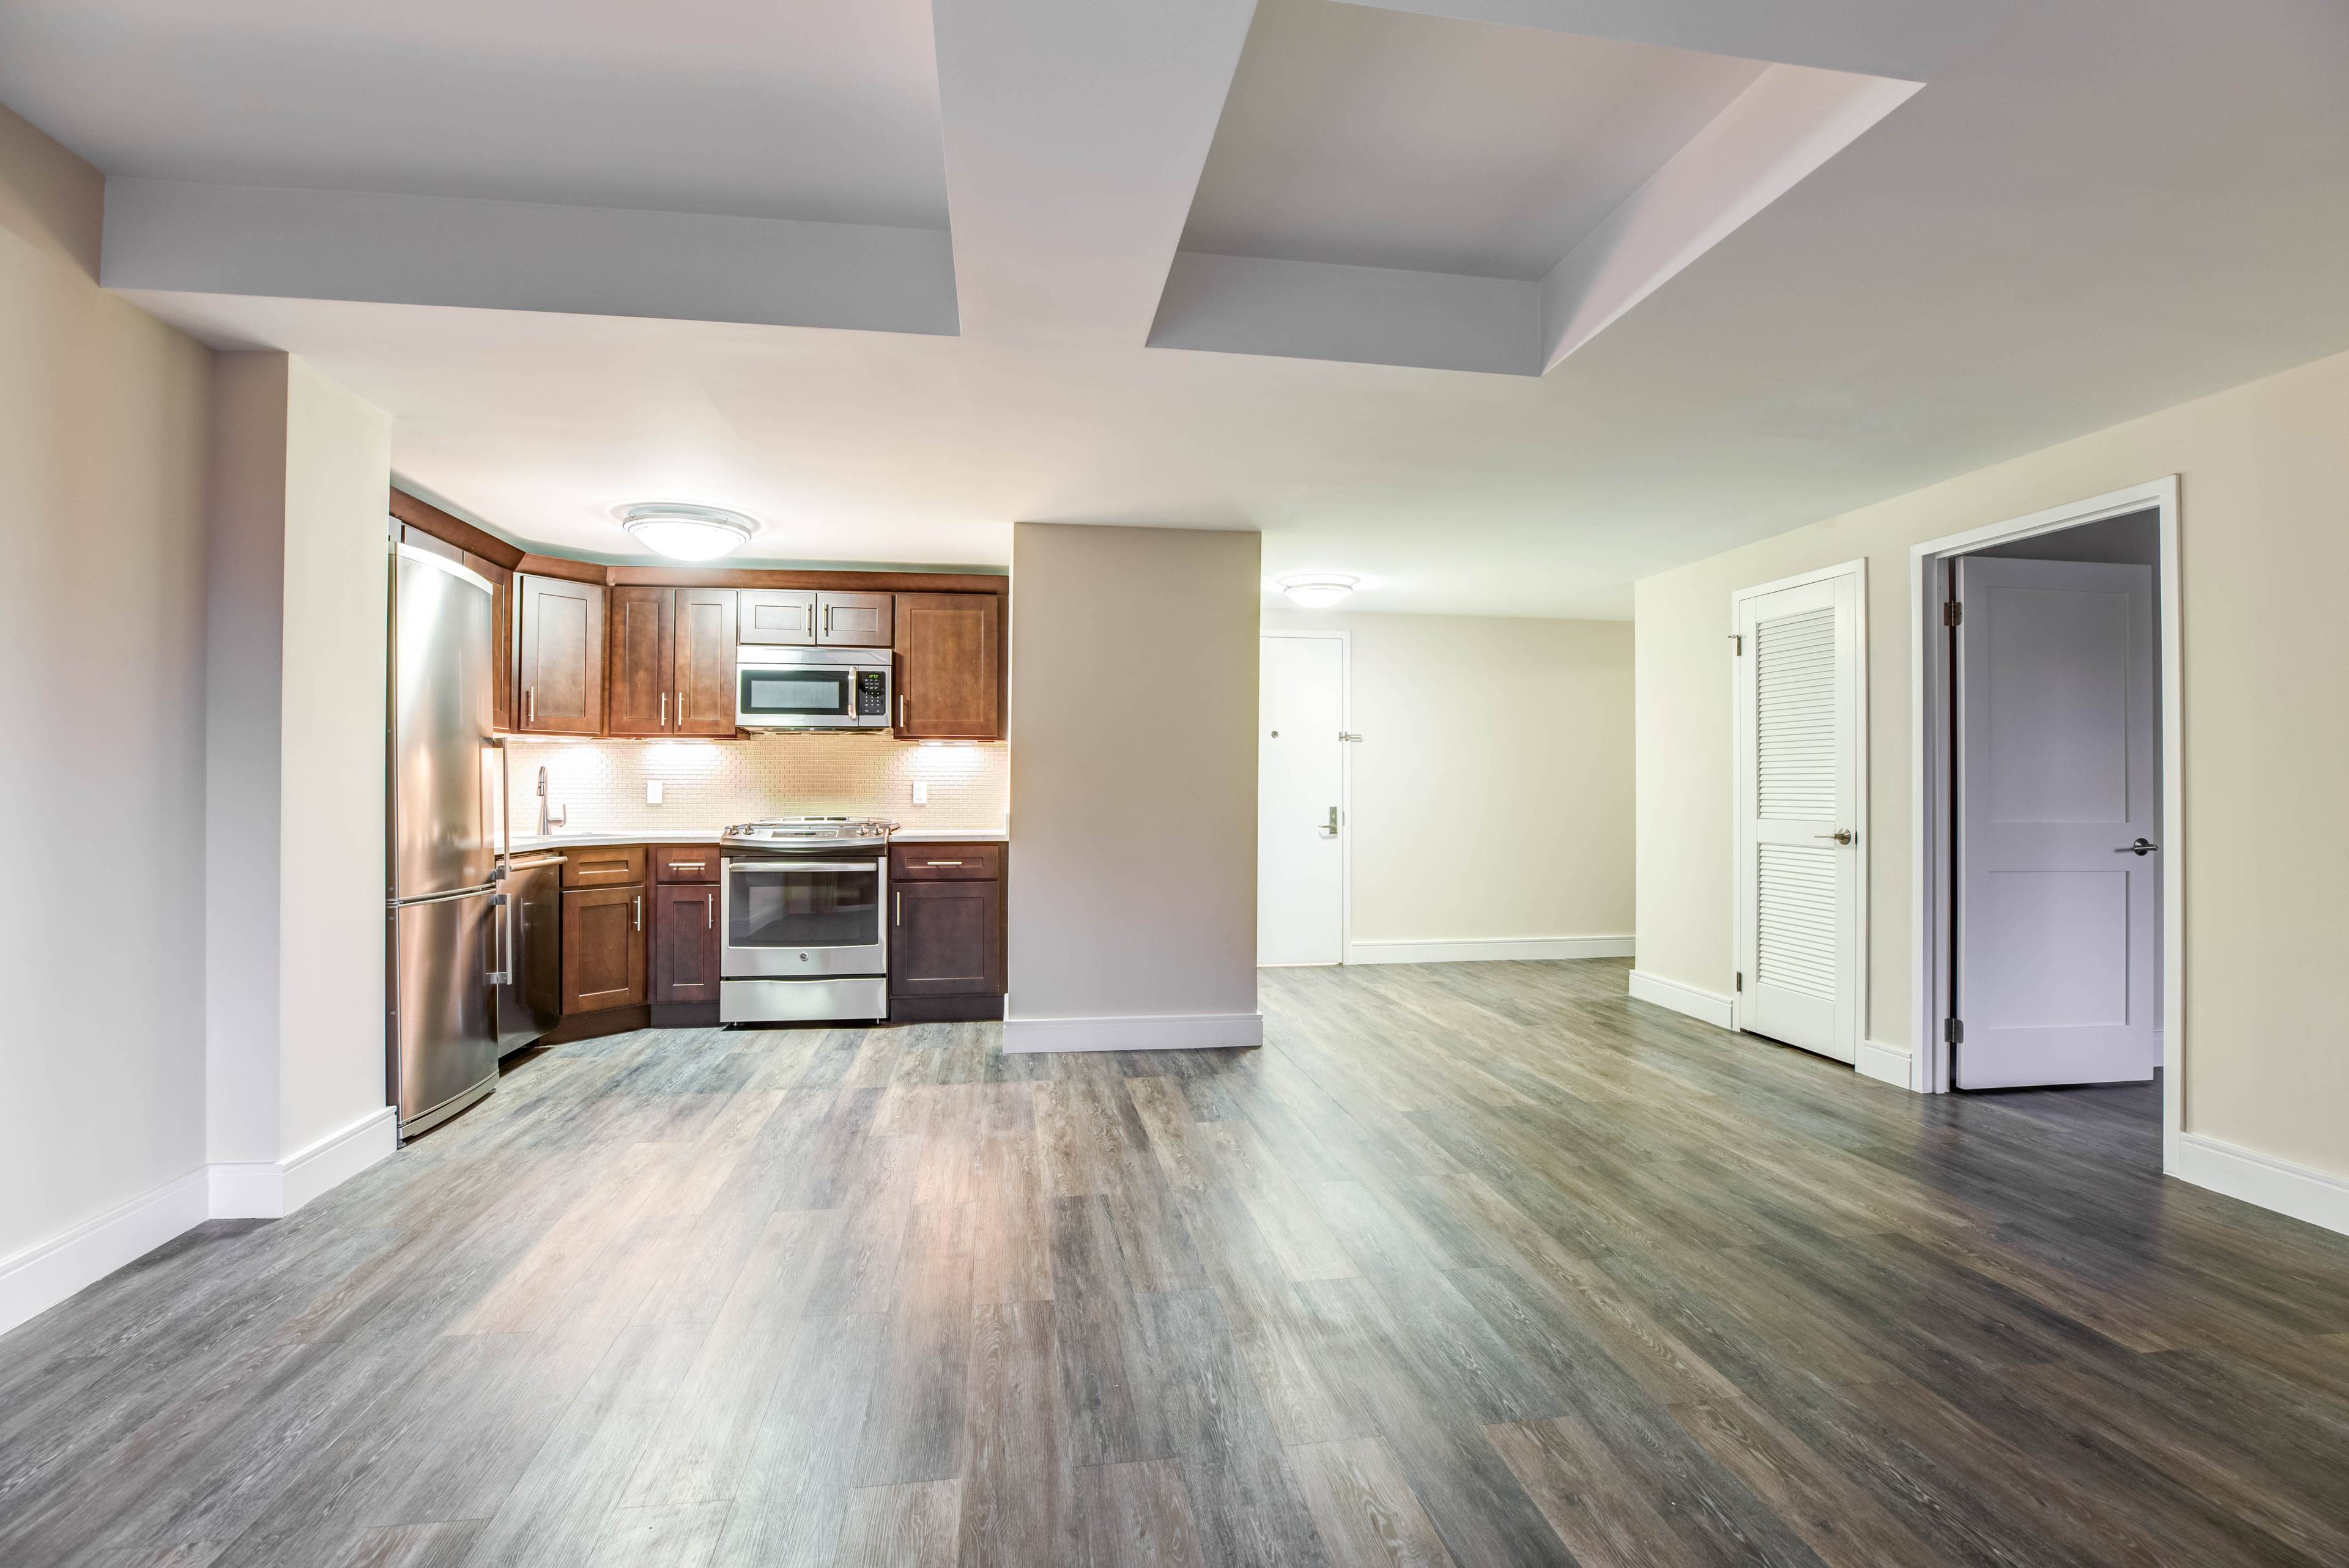 The Cole is a 162 unit luxury apartment building on Manhattan's Upper East Side, conveniently located near the Yorkville neighborhood's sidewalk cafes, bars, and lounges, and strategically located a few ...